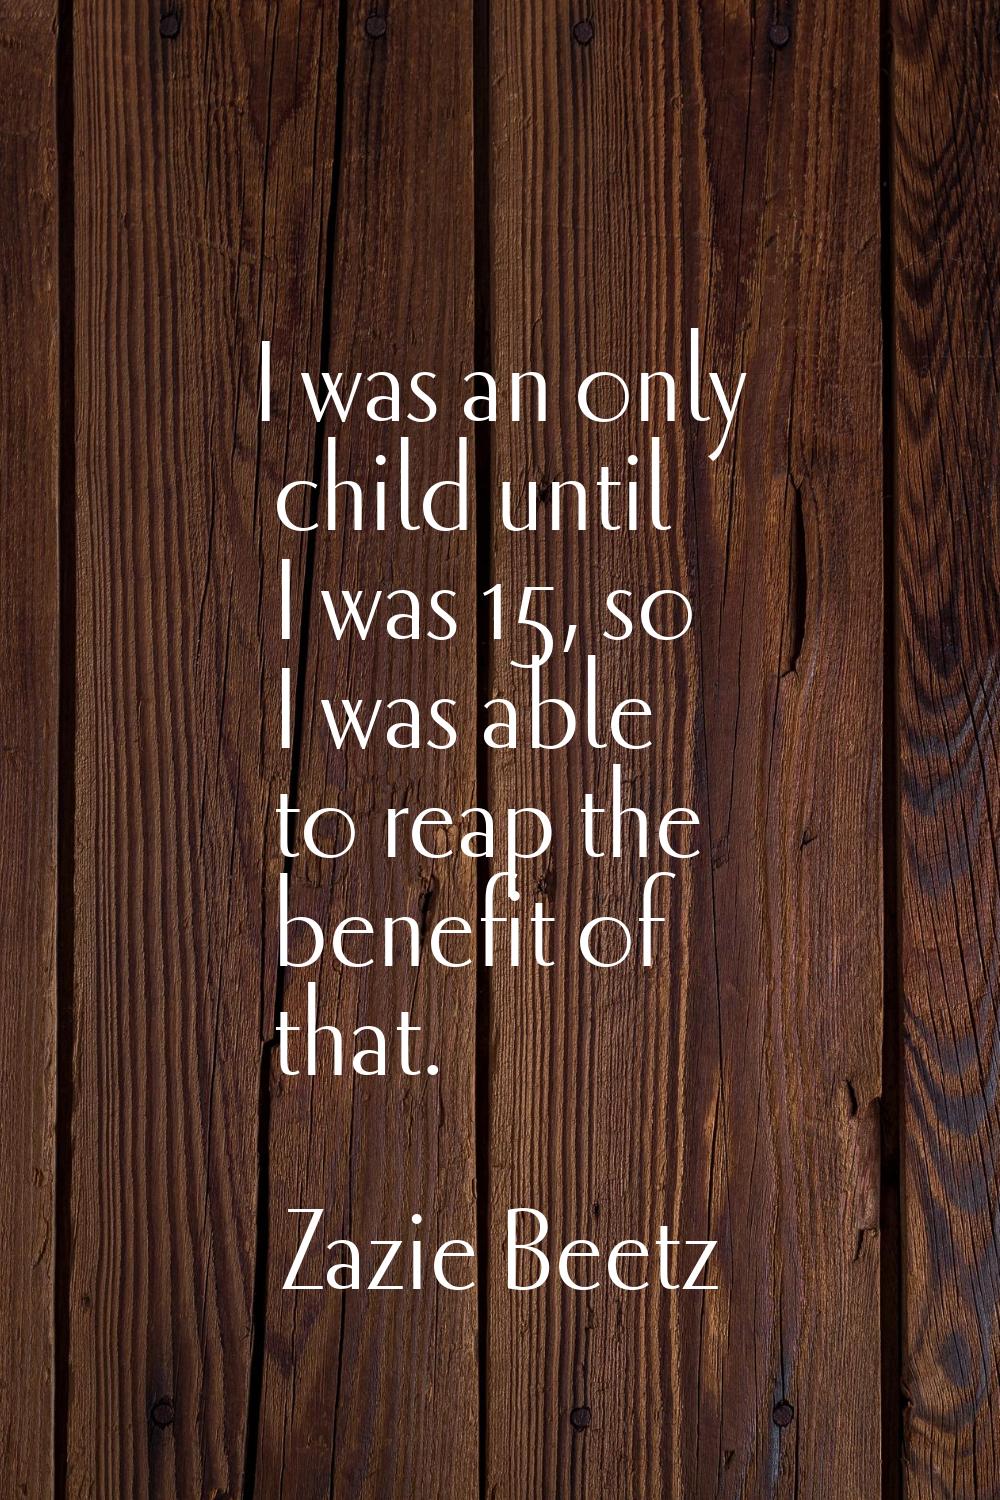 I was an only child until I was 15, so I was able to reap the benefit of that.